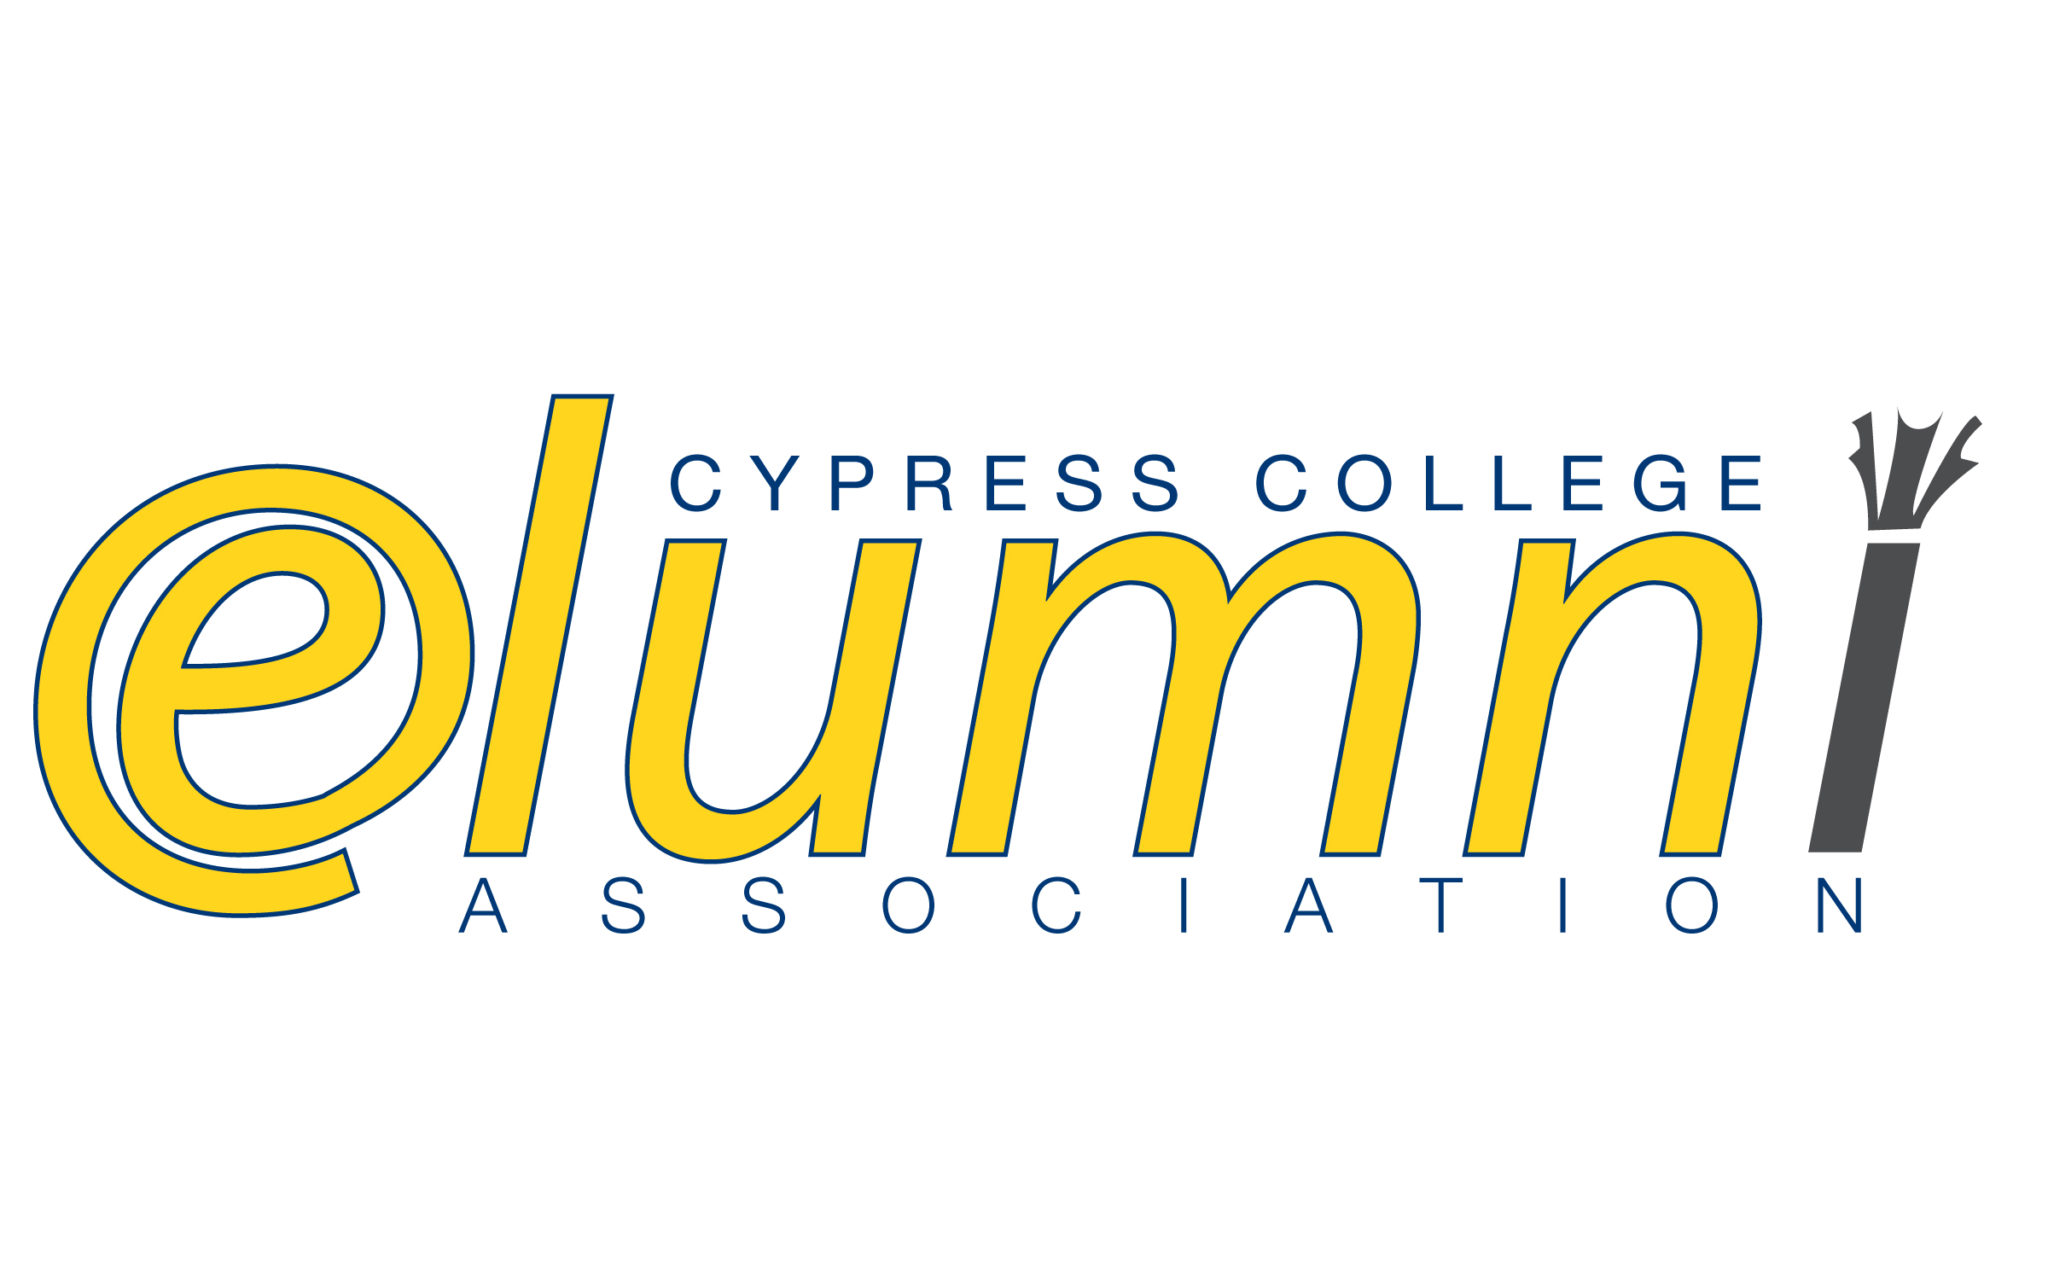 Cypress College has started a free "elumni association" as the 50th anniversary approaches.